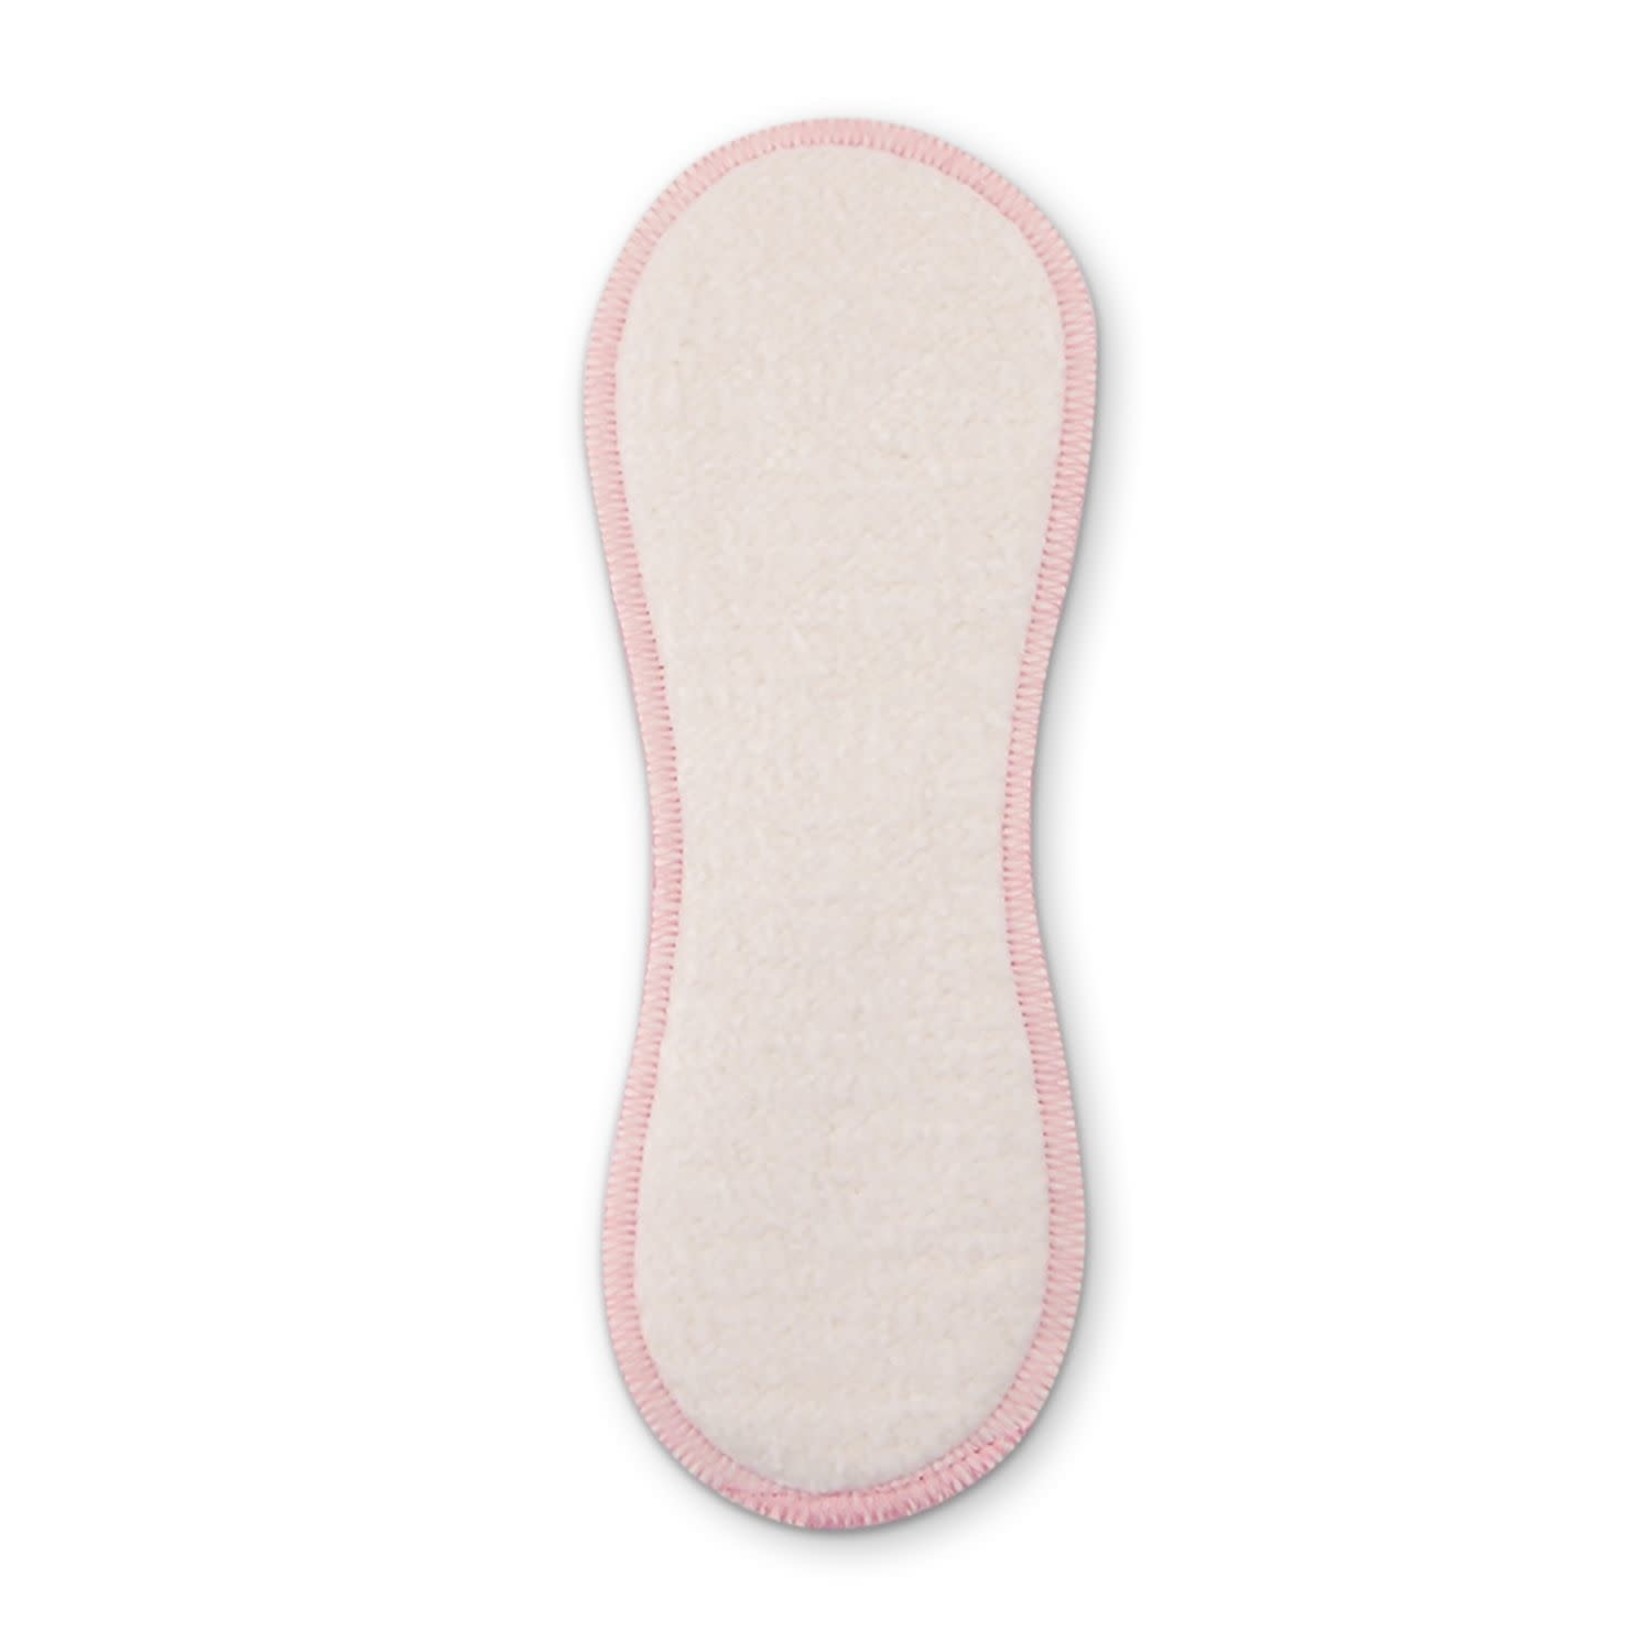 OKO CREATIONS REUSABLE PANTY LINERS (2 PACK)